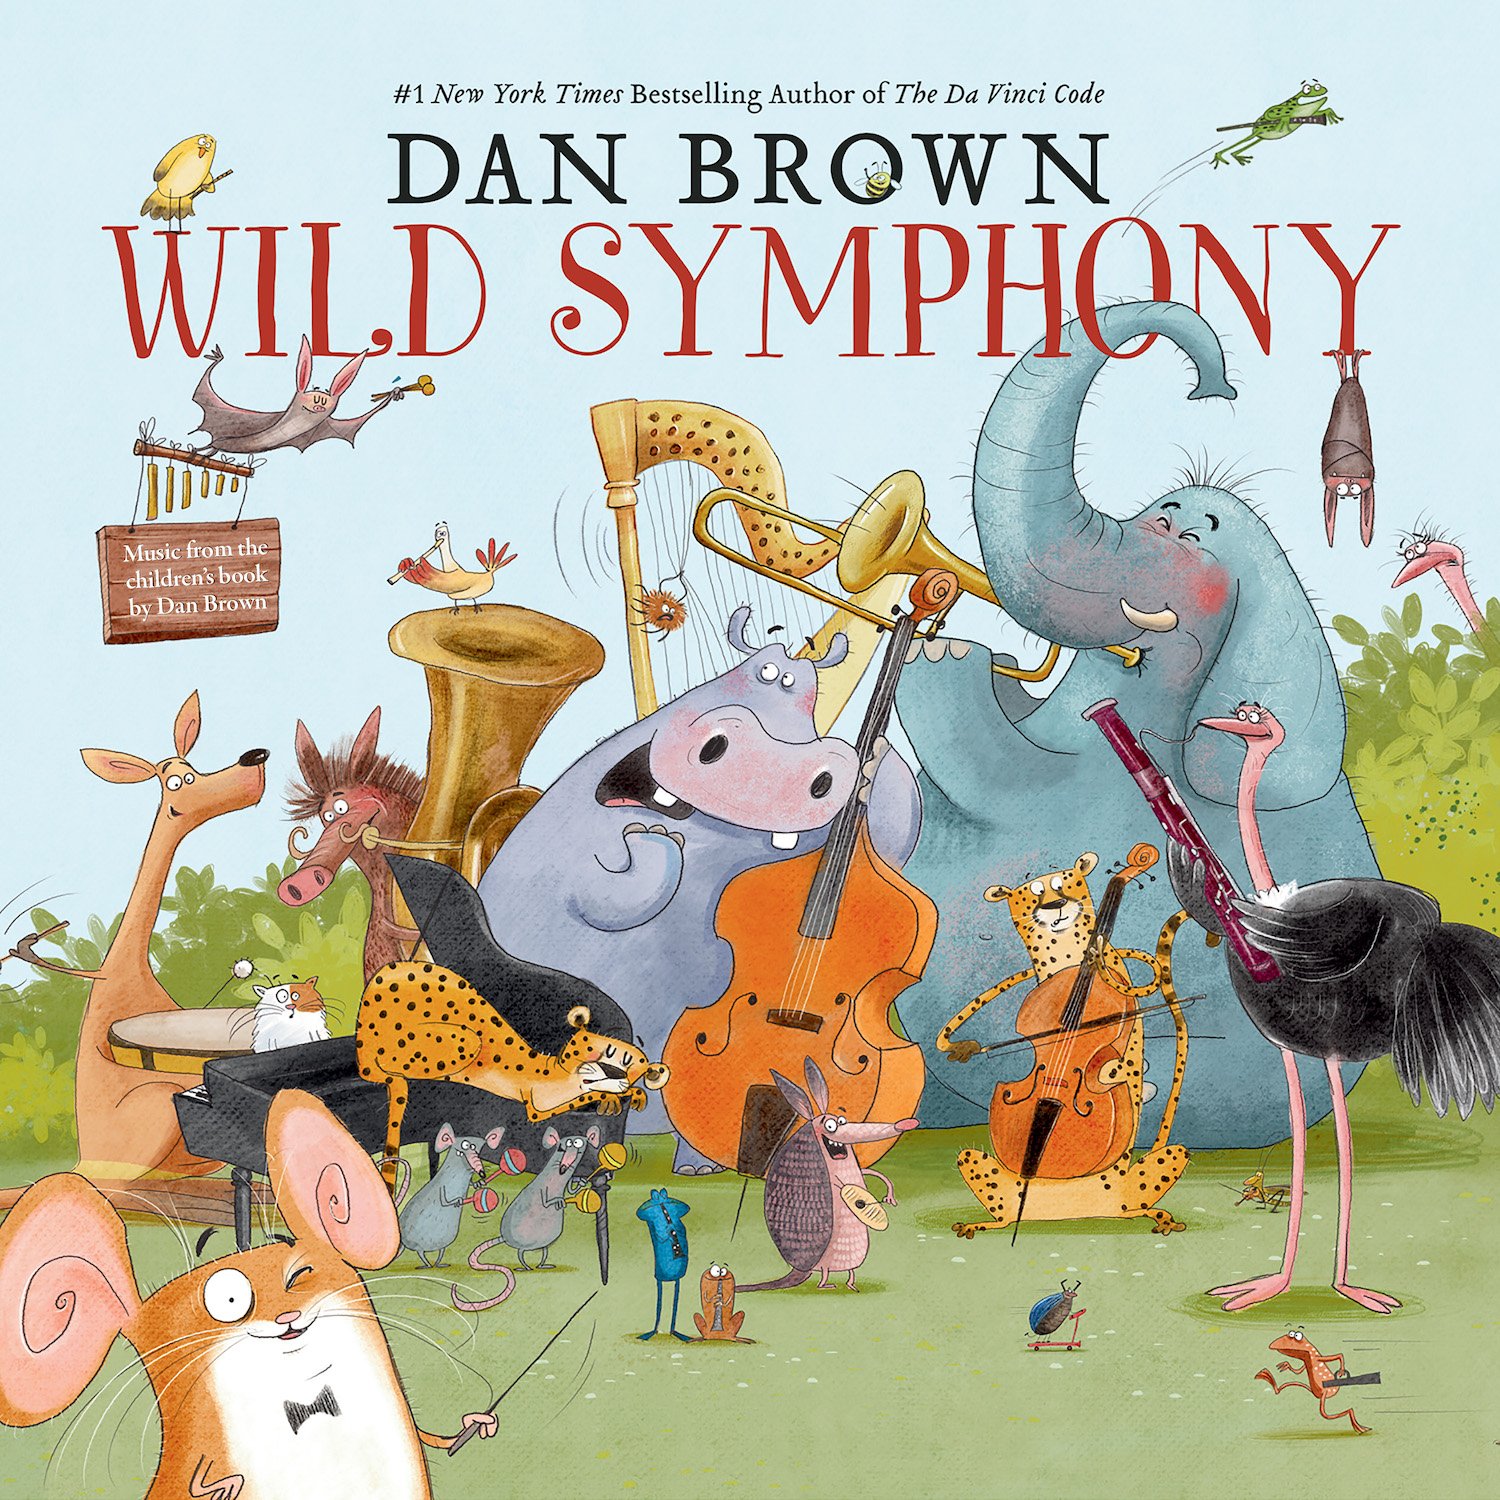 #1 New York Times Bestselling Author of The Da Vinci Code Dan Brown Wild Symphony album cover, a busy illustration of a variety of animals playing classical instruments with playful expressions, in a field with bushes, near water, and a blue sky